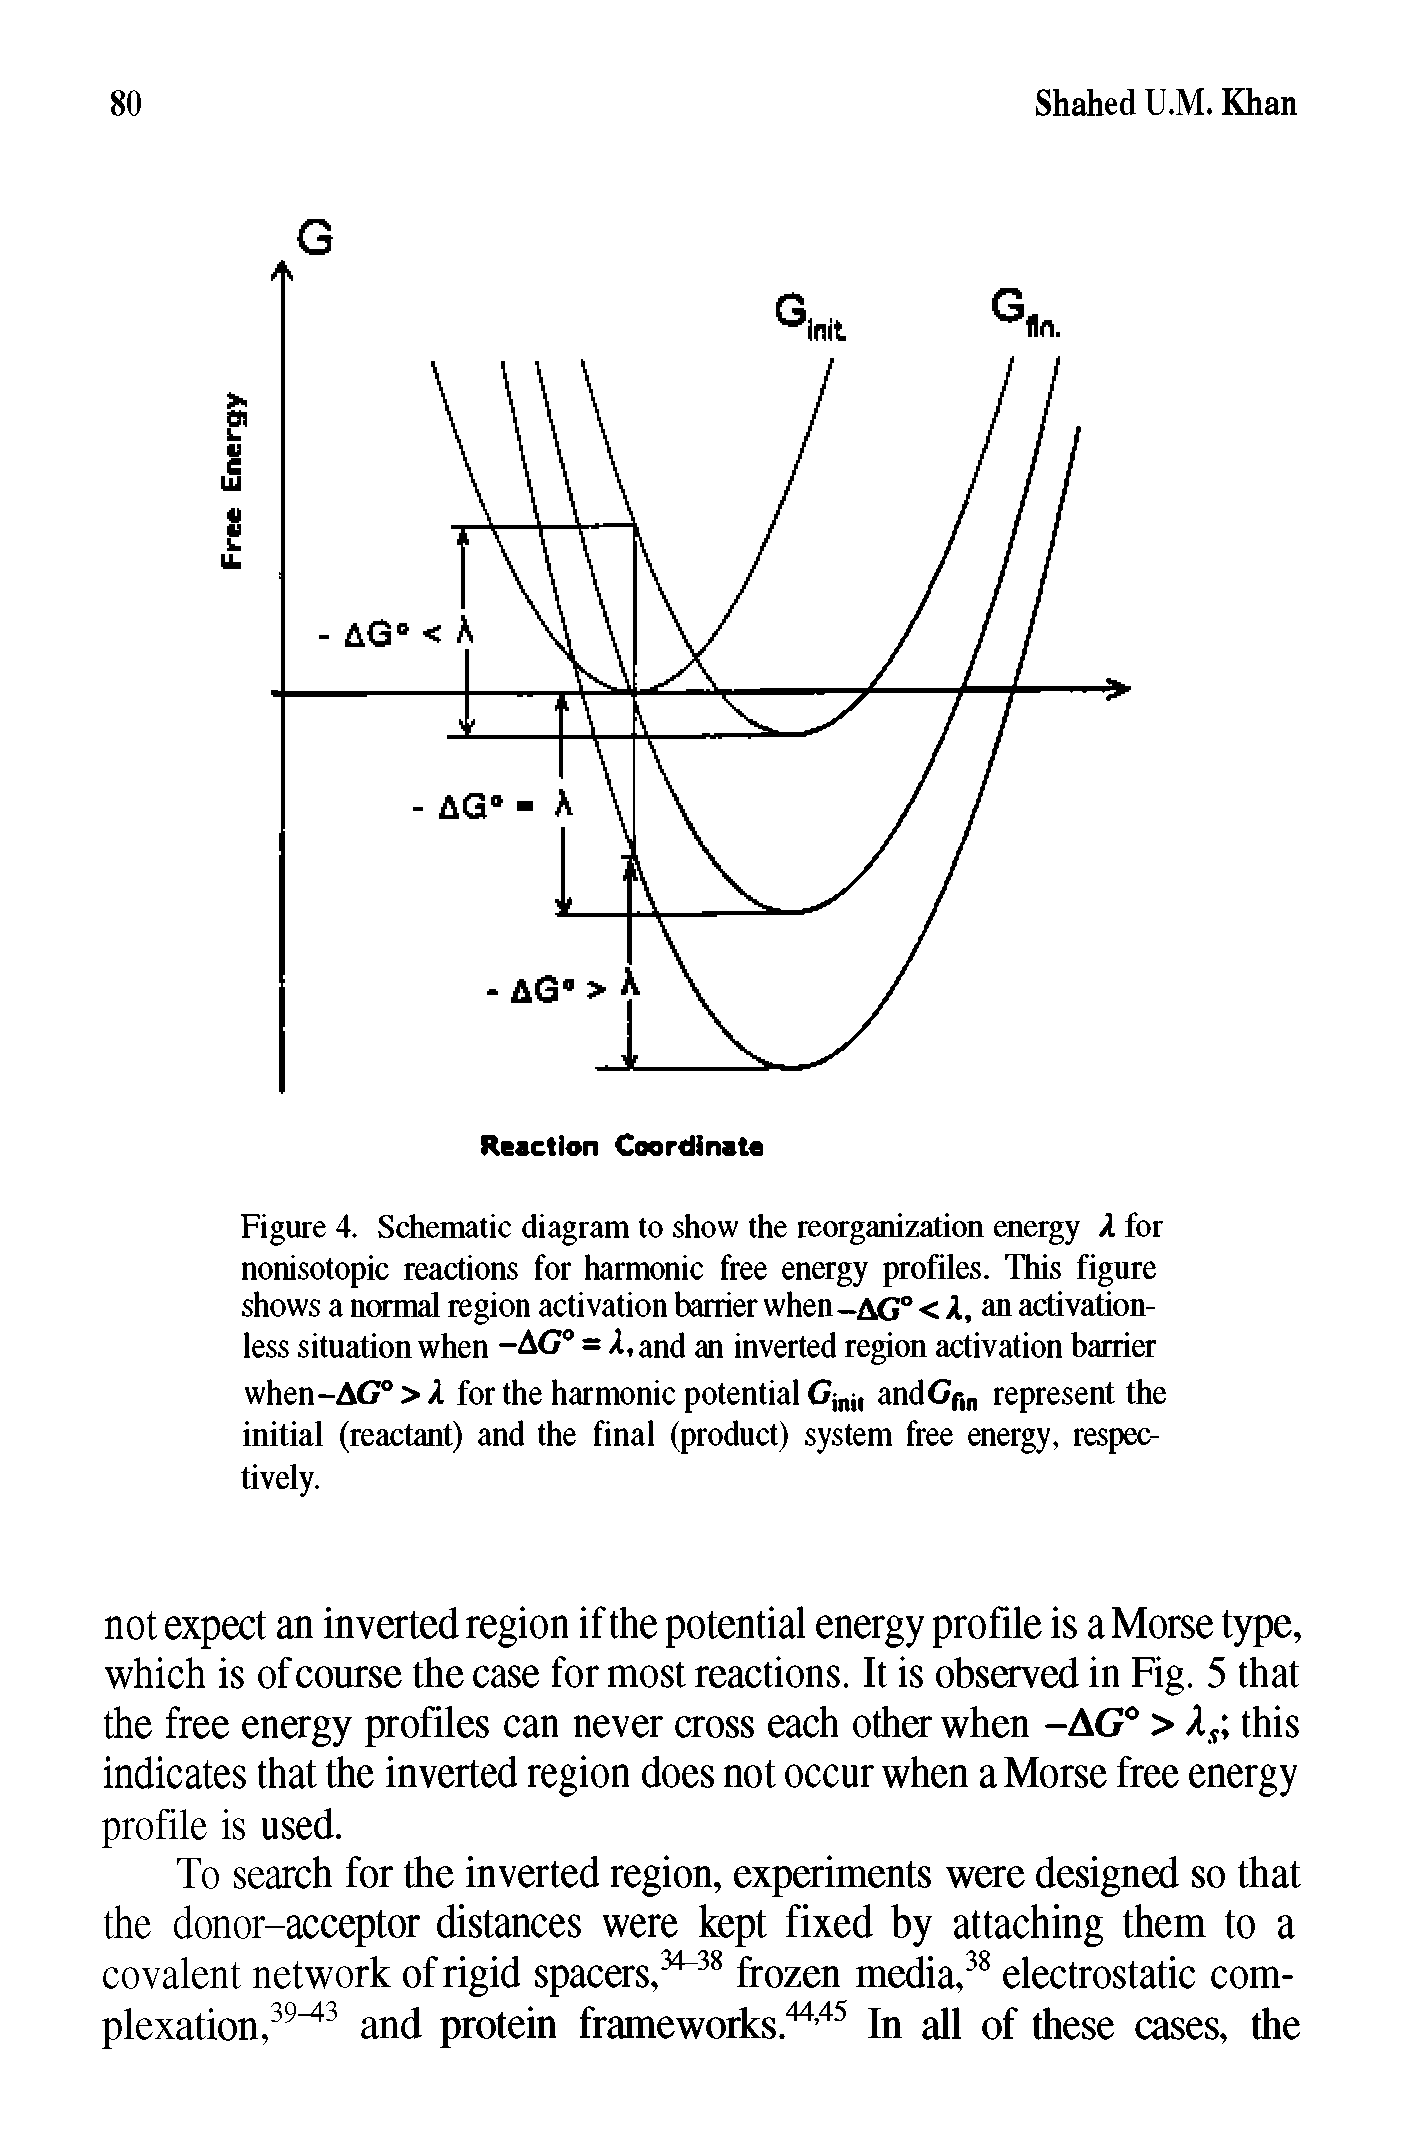 Figure 4. Schematic diagram to show the reorganization energy X for nonisotopic reactions for harmonic free energy profiles. This figure shows a normal region activation barrier when-AG° < an activationless situation when -AC =. l.and an inverted region activation barrier when-AG° > A for the harmonic potential inii andGfin represent the initial (reactant) and the final (product) system free energy, respectively.